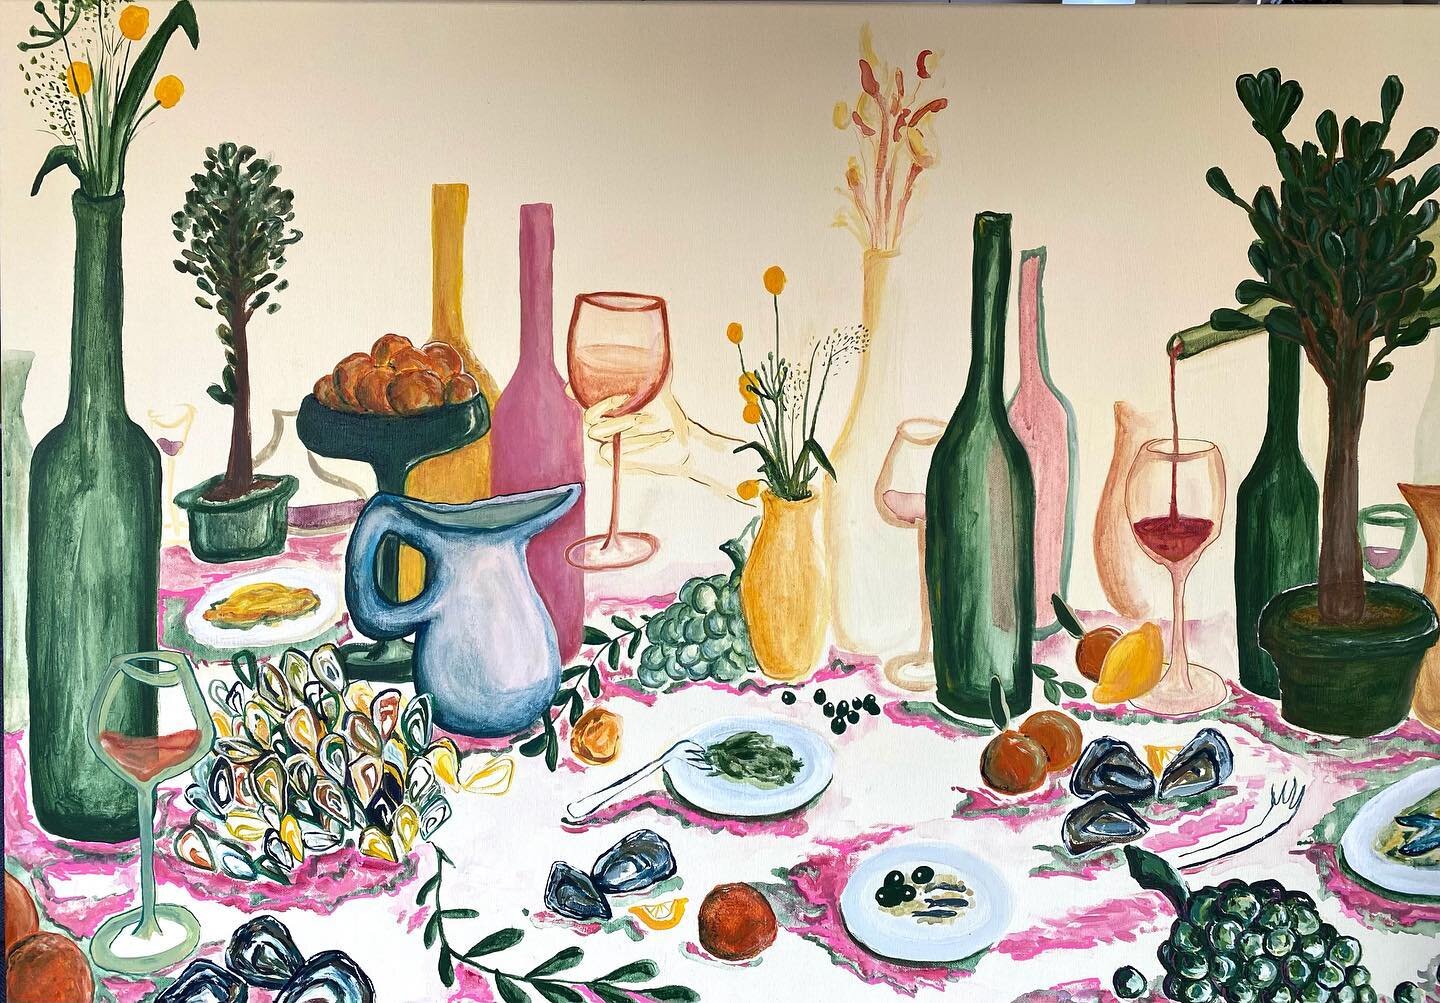 Spring time vibes on this baby💜🍊 *Commission* 
70x100cm mixed media on canvas
.
.
#commissionart #felinesart #dinnertime #dinnertable #paintings #paintingsforsale #foodart #summertime #springtime #summerlunch #springtimelunch #tabledecoration #food